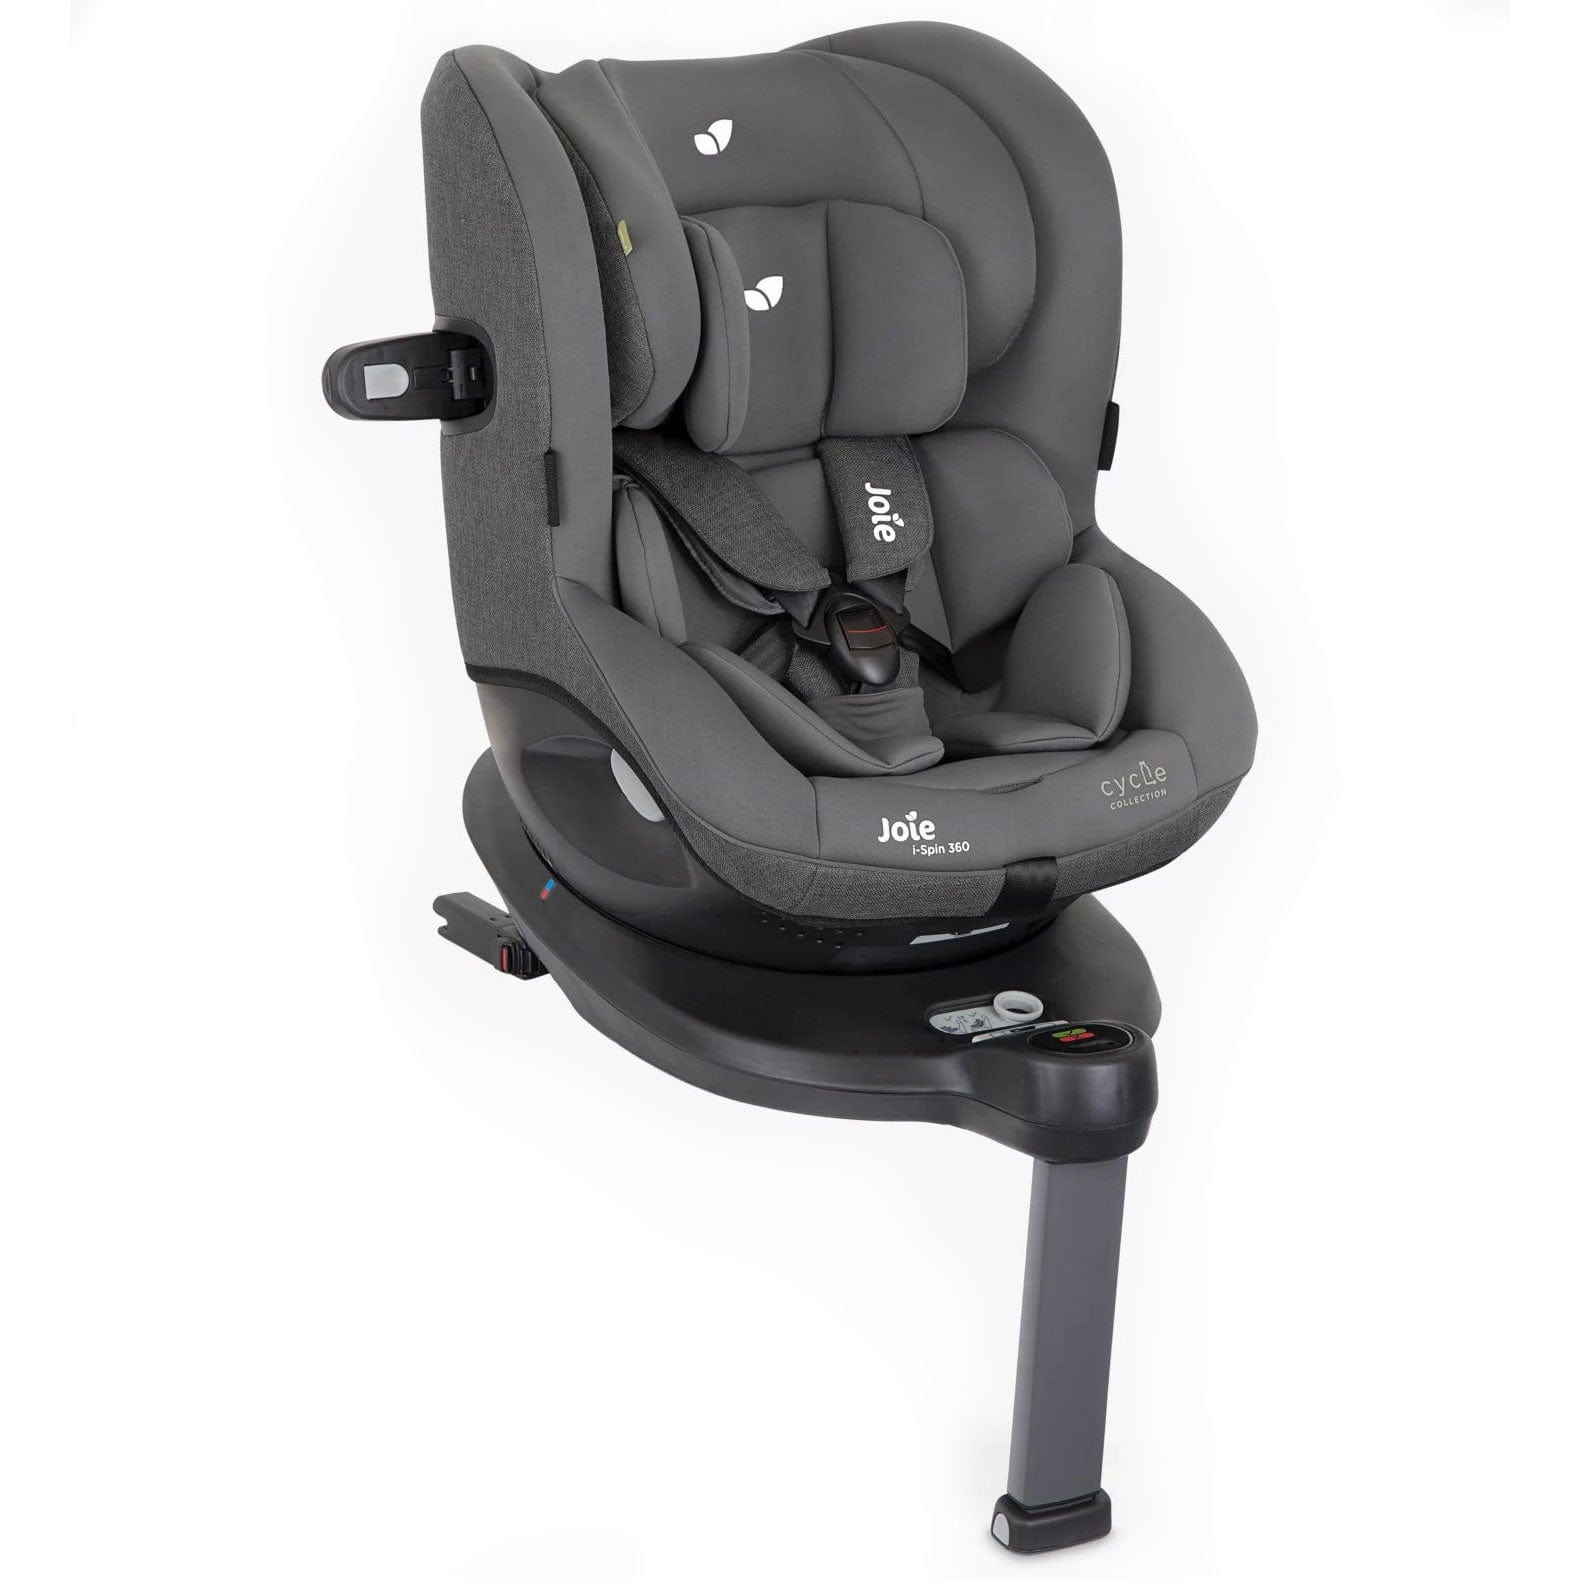 Joie rear facing car seats Joie i-Spin 360 i-Size Car Seat (CYCLE Collection) in Shell Grey C1801KACYC000